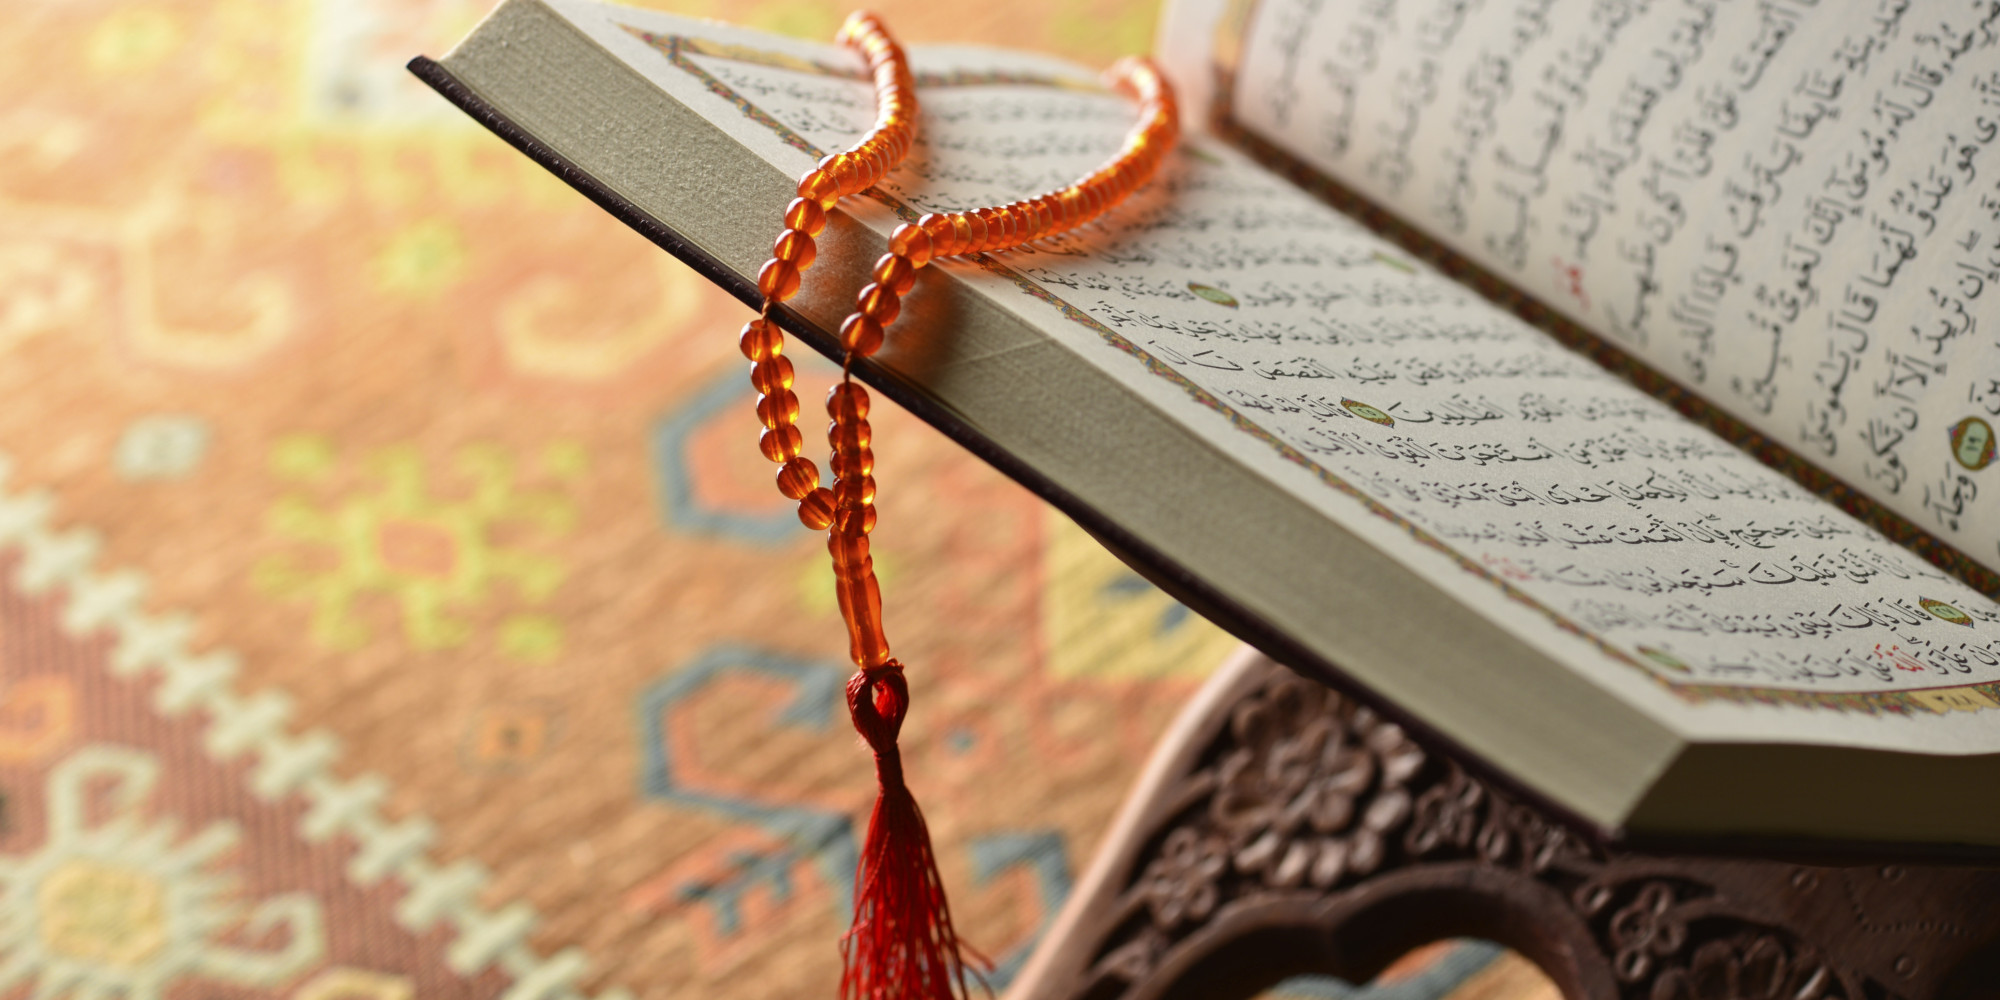 9 Questions You Should Ask Yourself Before Converting to Islam | HuffPost